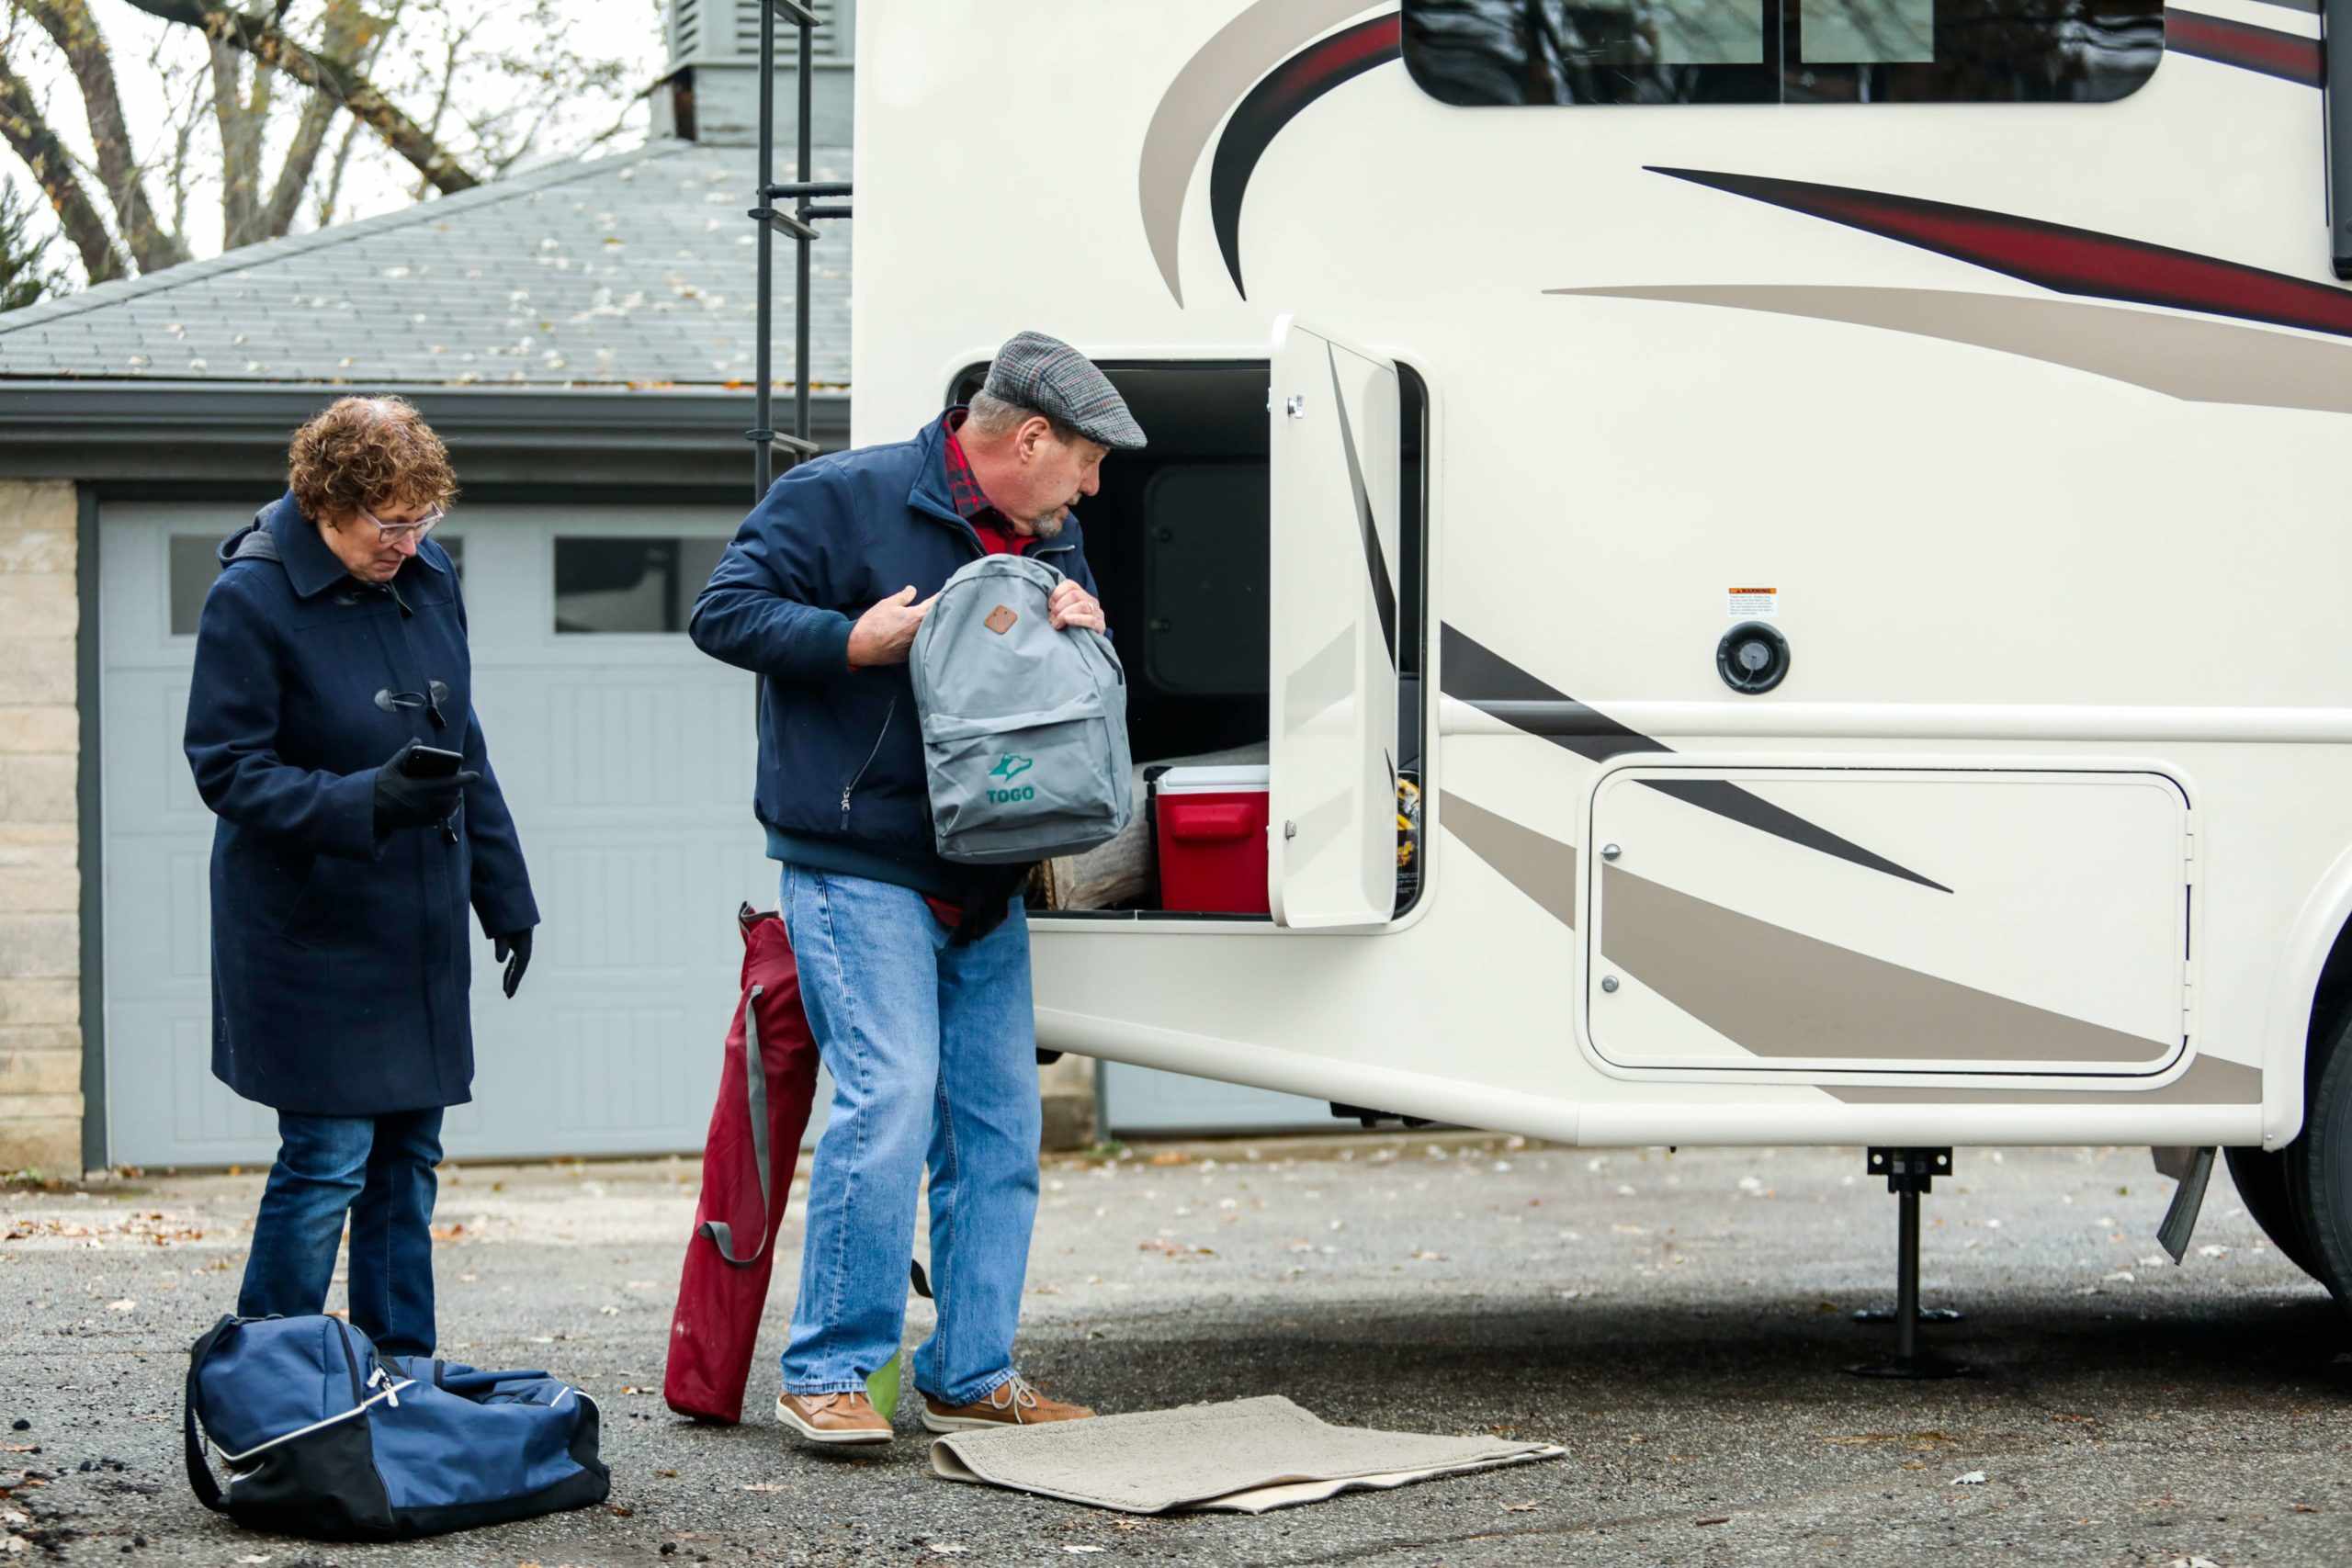 RV Packing Checklist: What To Pack For Your RV Trip Based on Where You’re Going